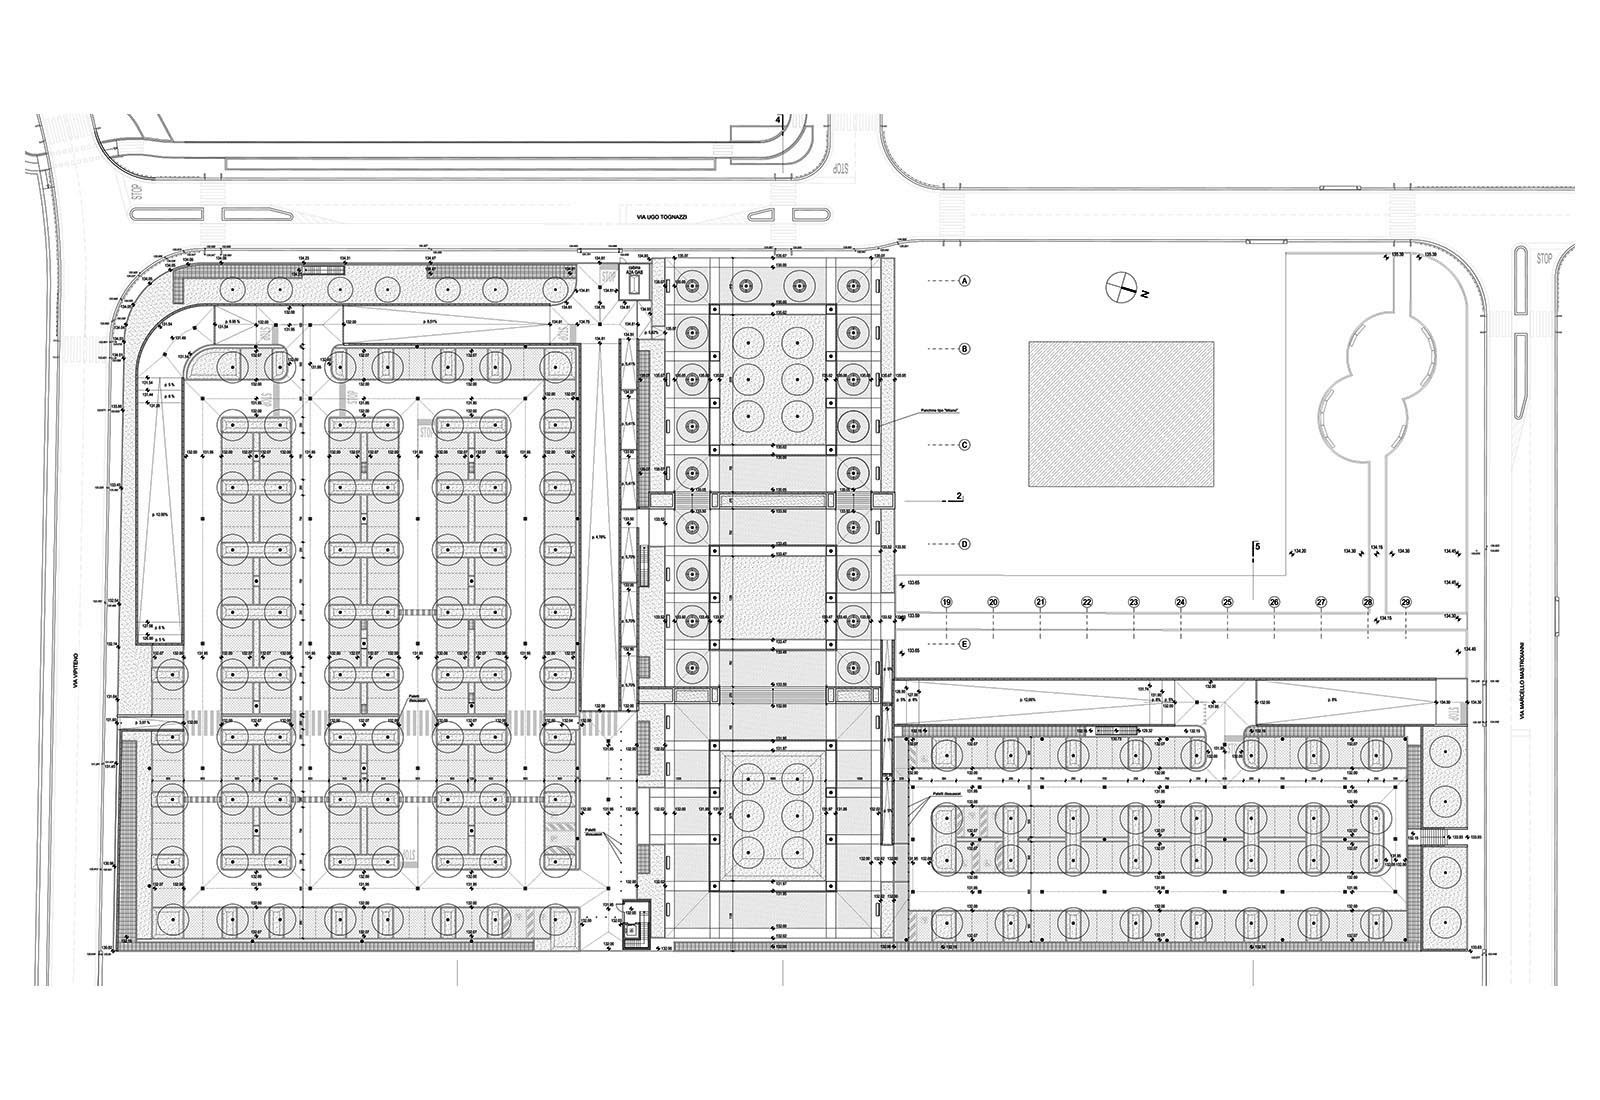 Square and parking lots in Adriano area Milan - Project plan